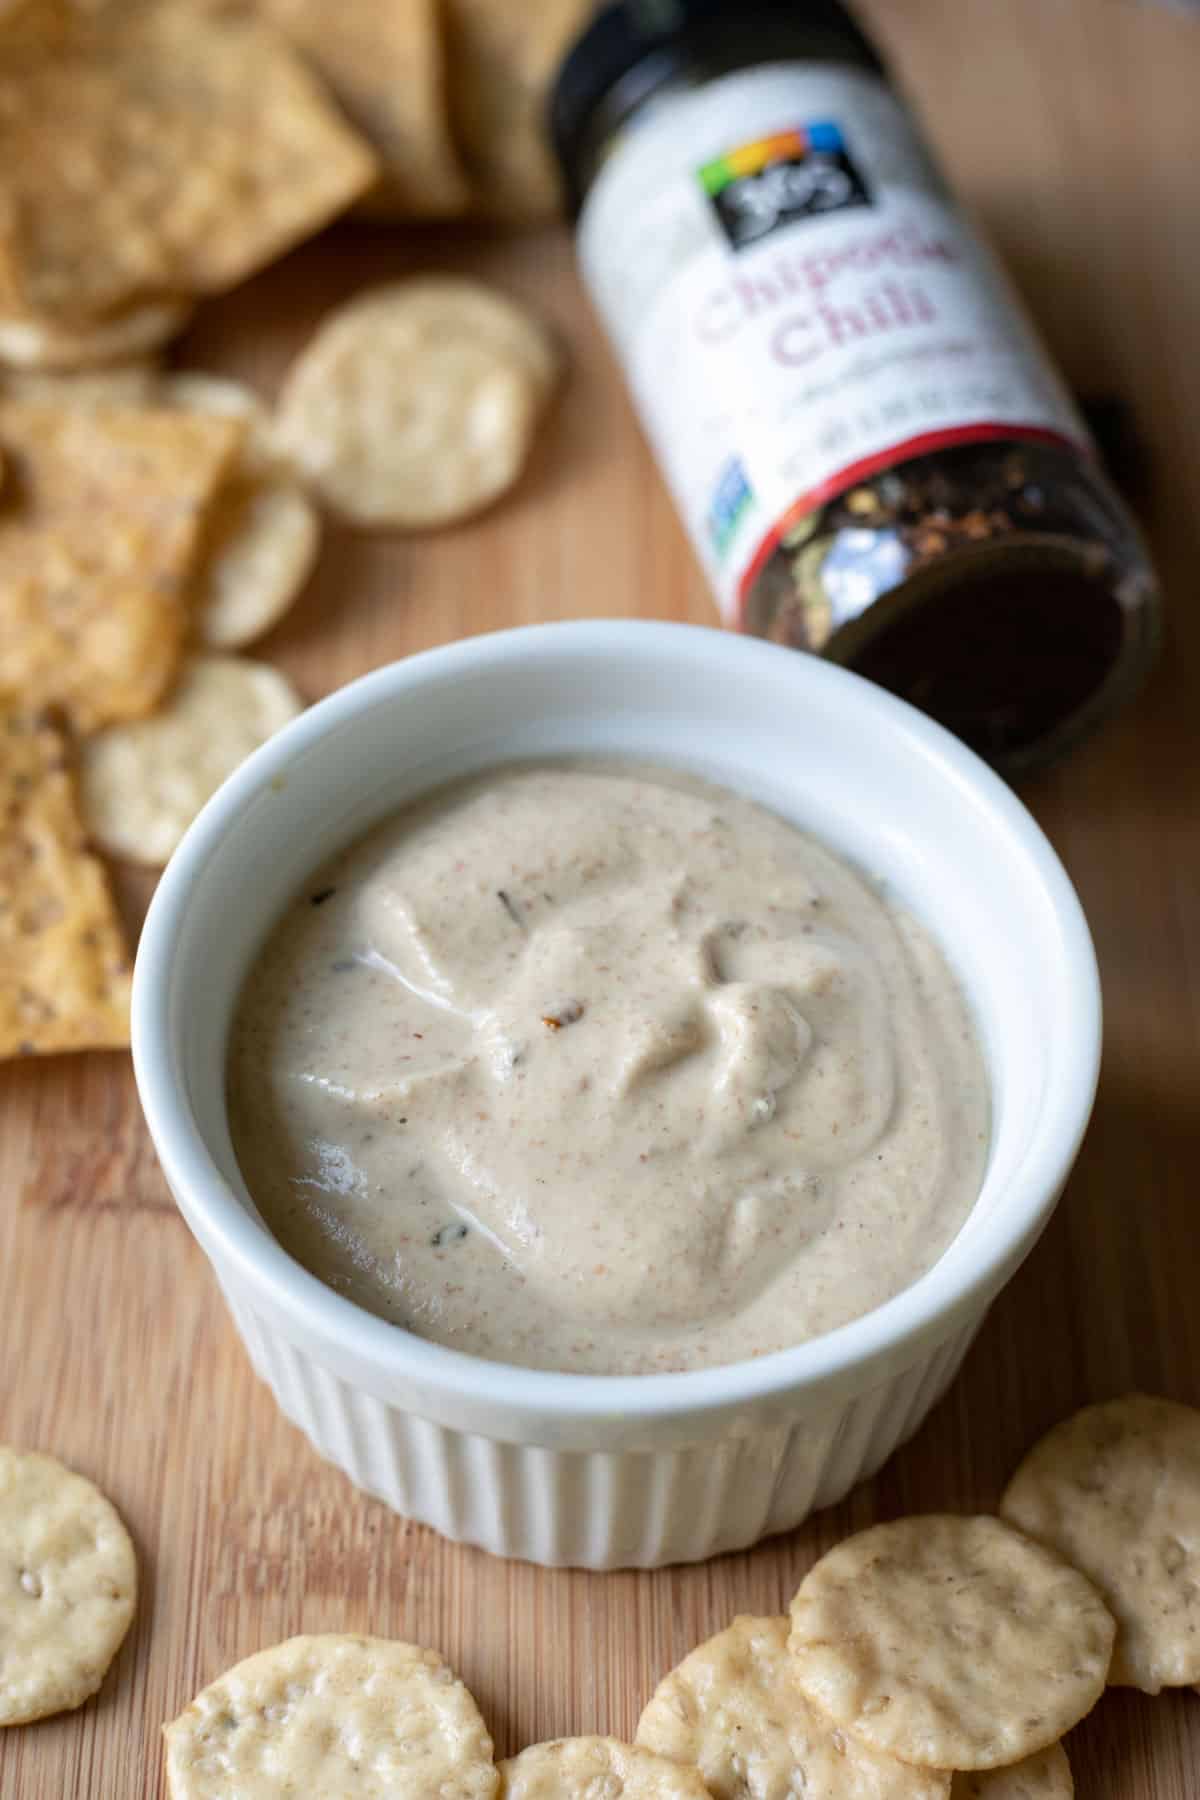 a ramekin filled with homemade chipotle almond sauce, a copycat of Bitchin Sauce's chipotle flavor.